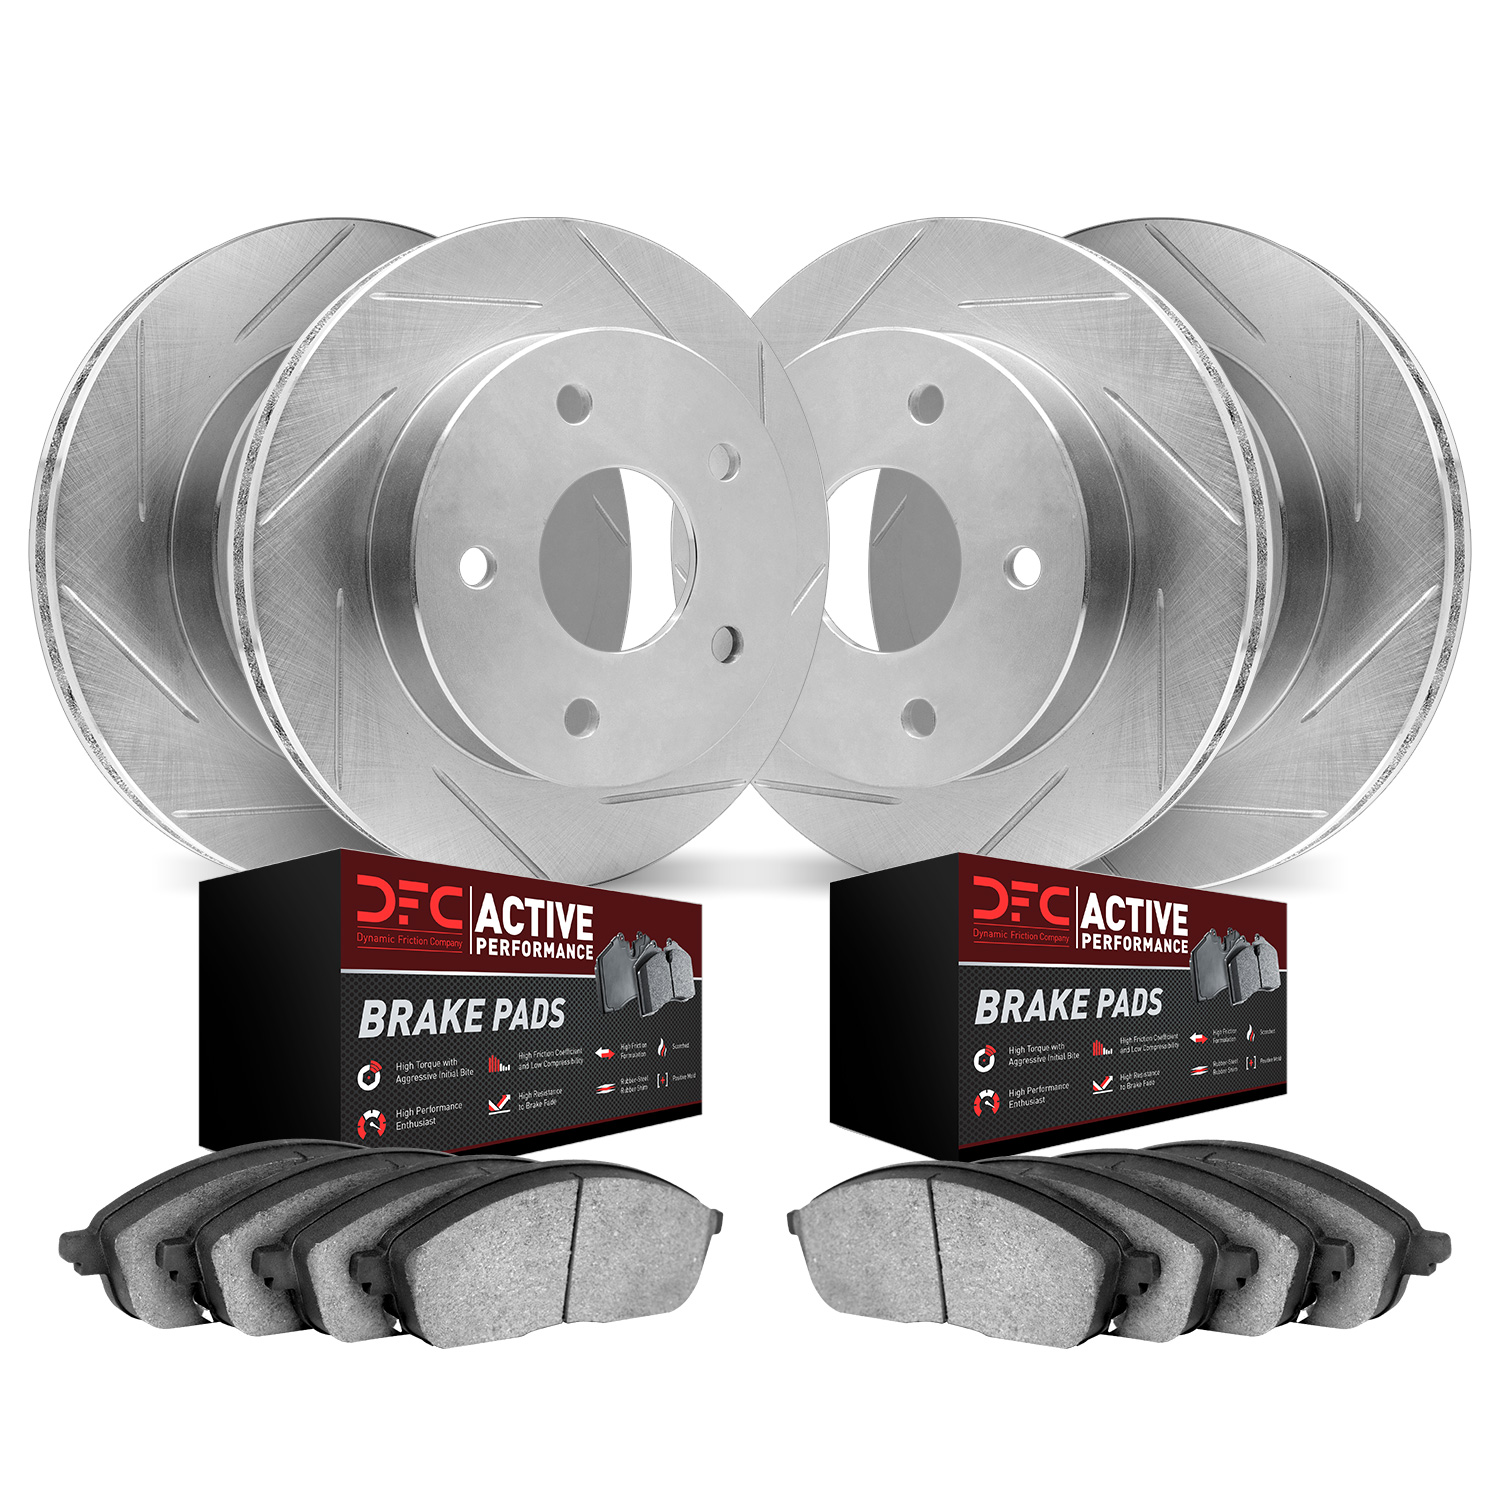 2704-46018 Geoperformance Slotted Brake Rotors with Active Performance Pads Kits, 2005-2013 GM, Position: Front and Rear